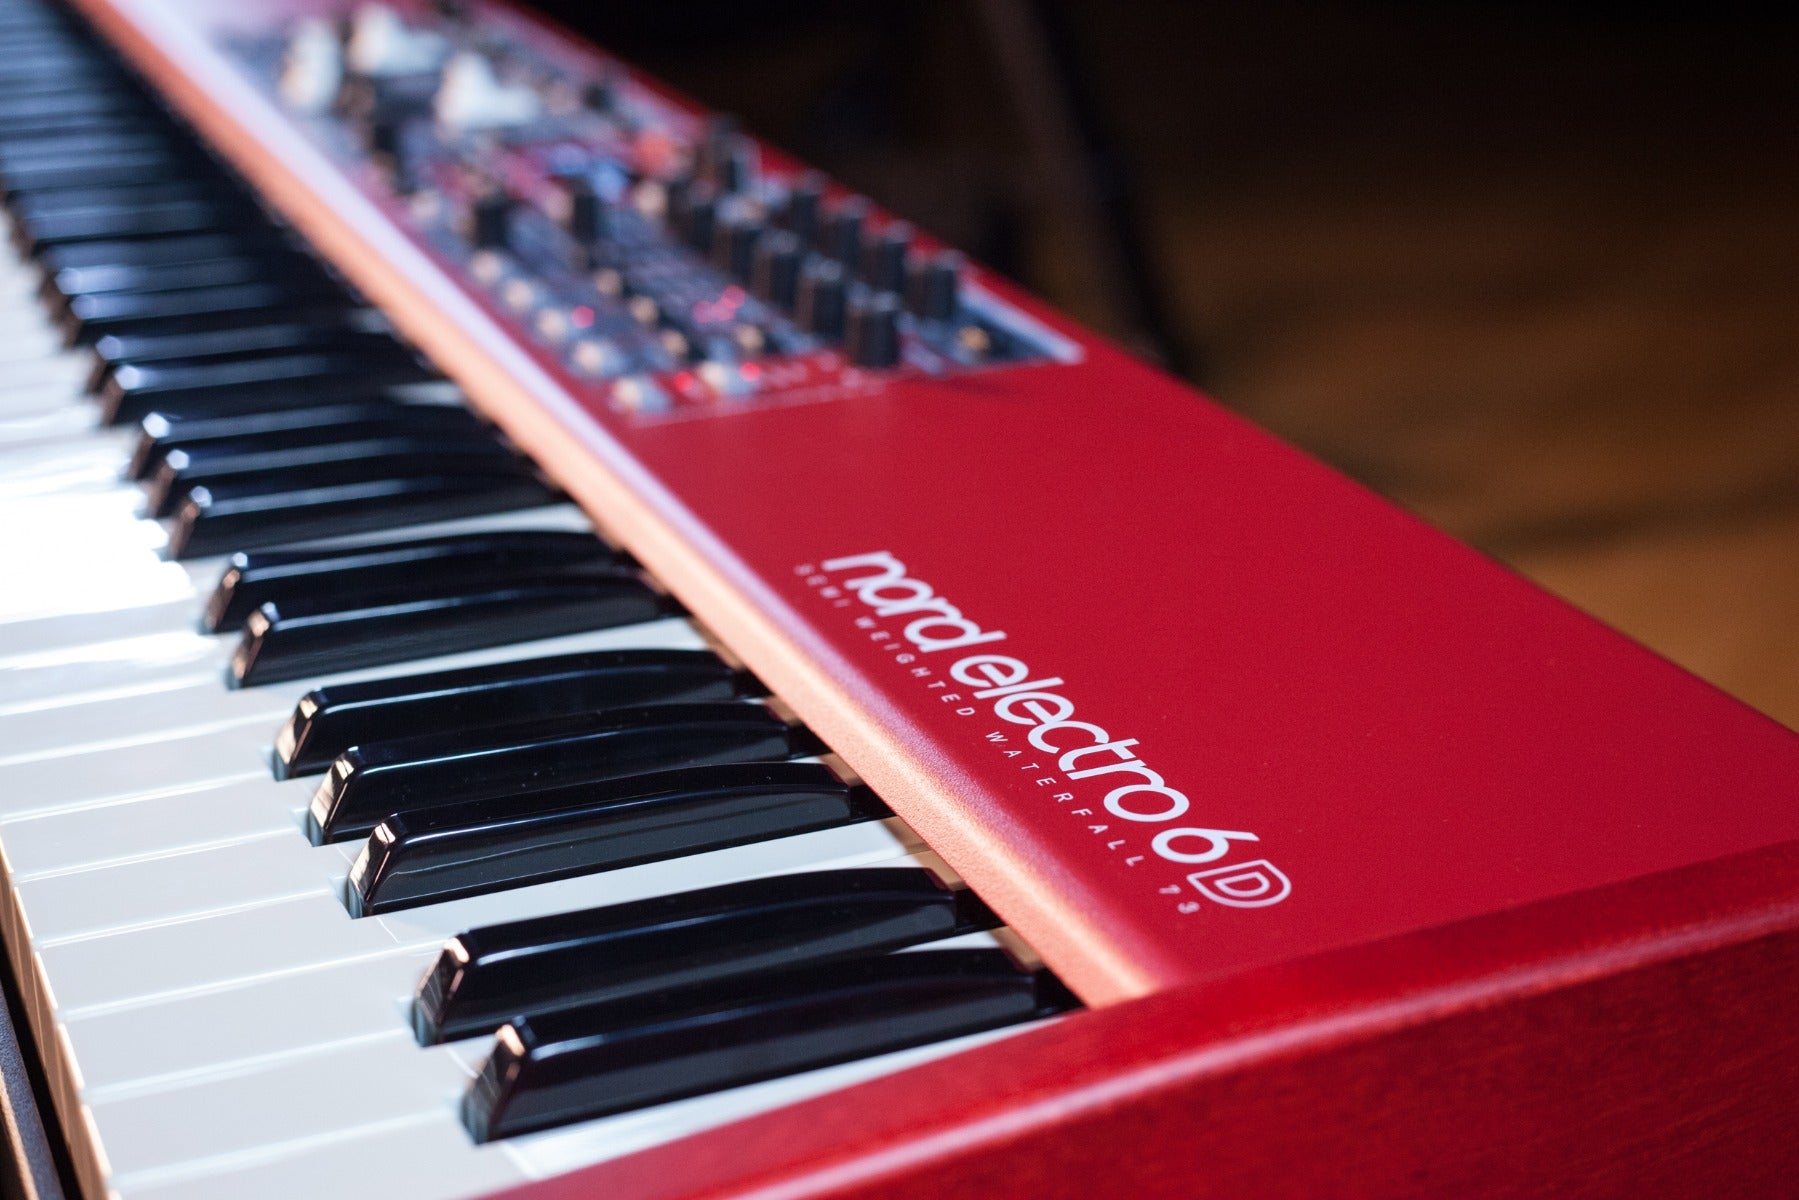 Nord Electro 6D 73 Stage Keyboard